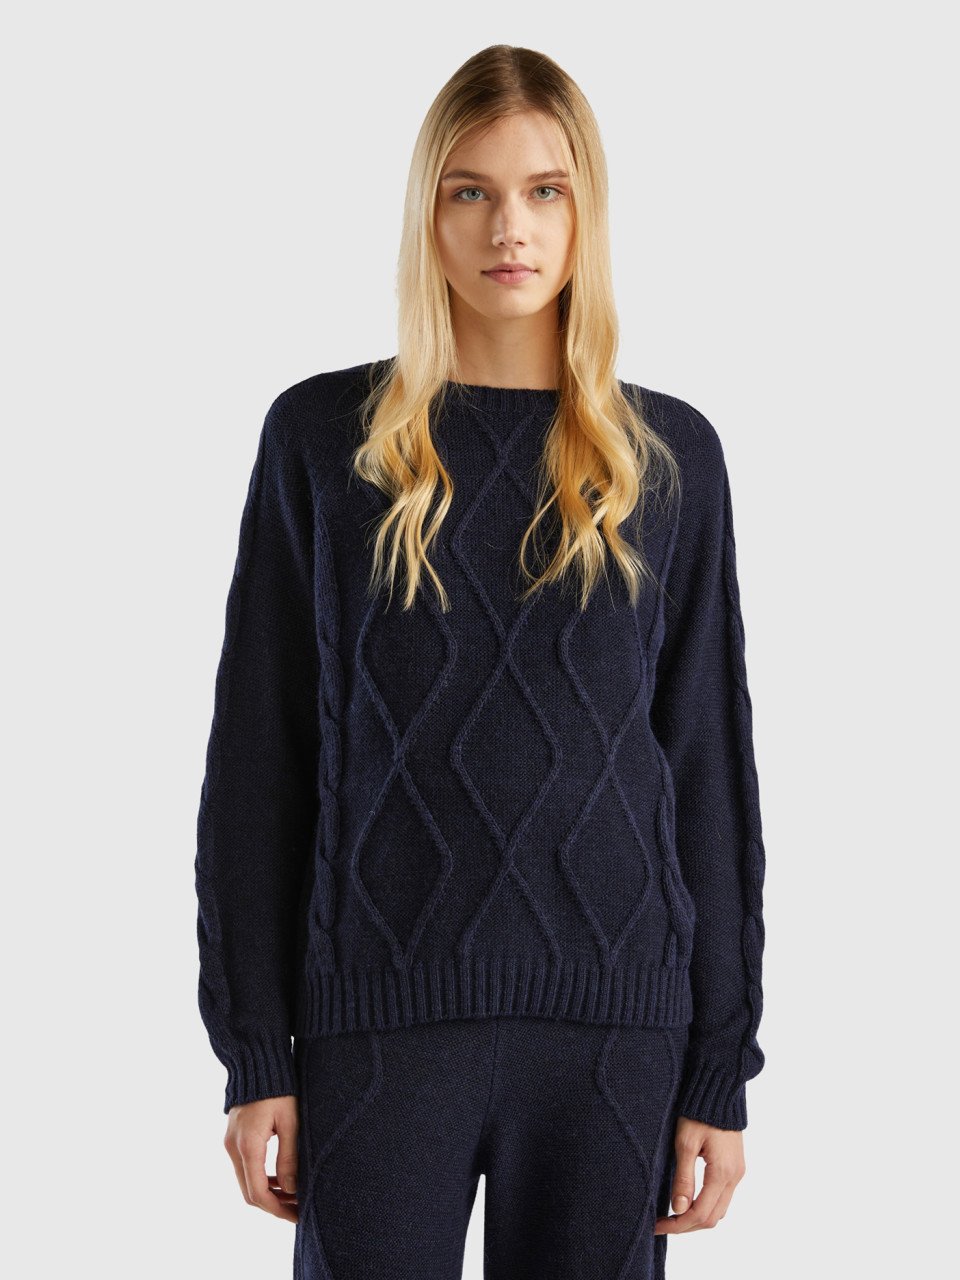 Benetton, Sweater With Cables And Diamonds, Dark Blue, Women